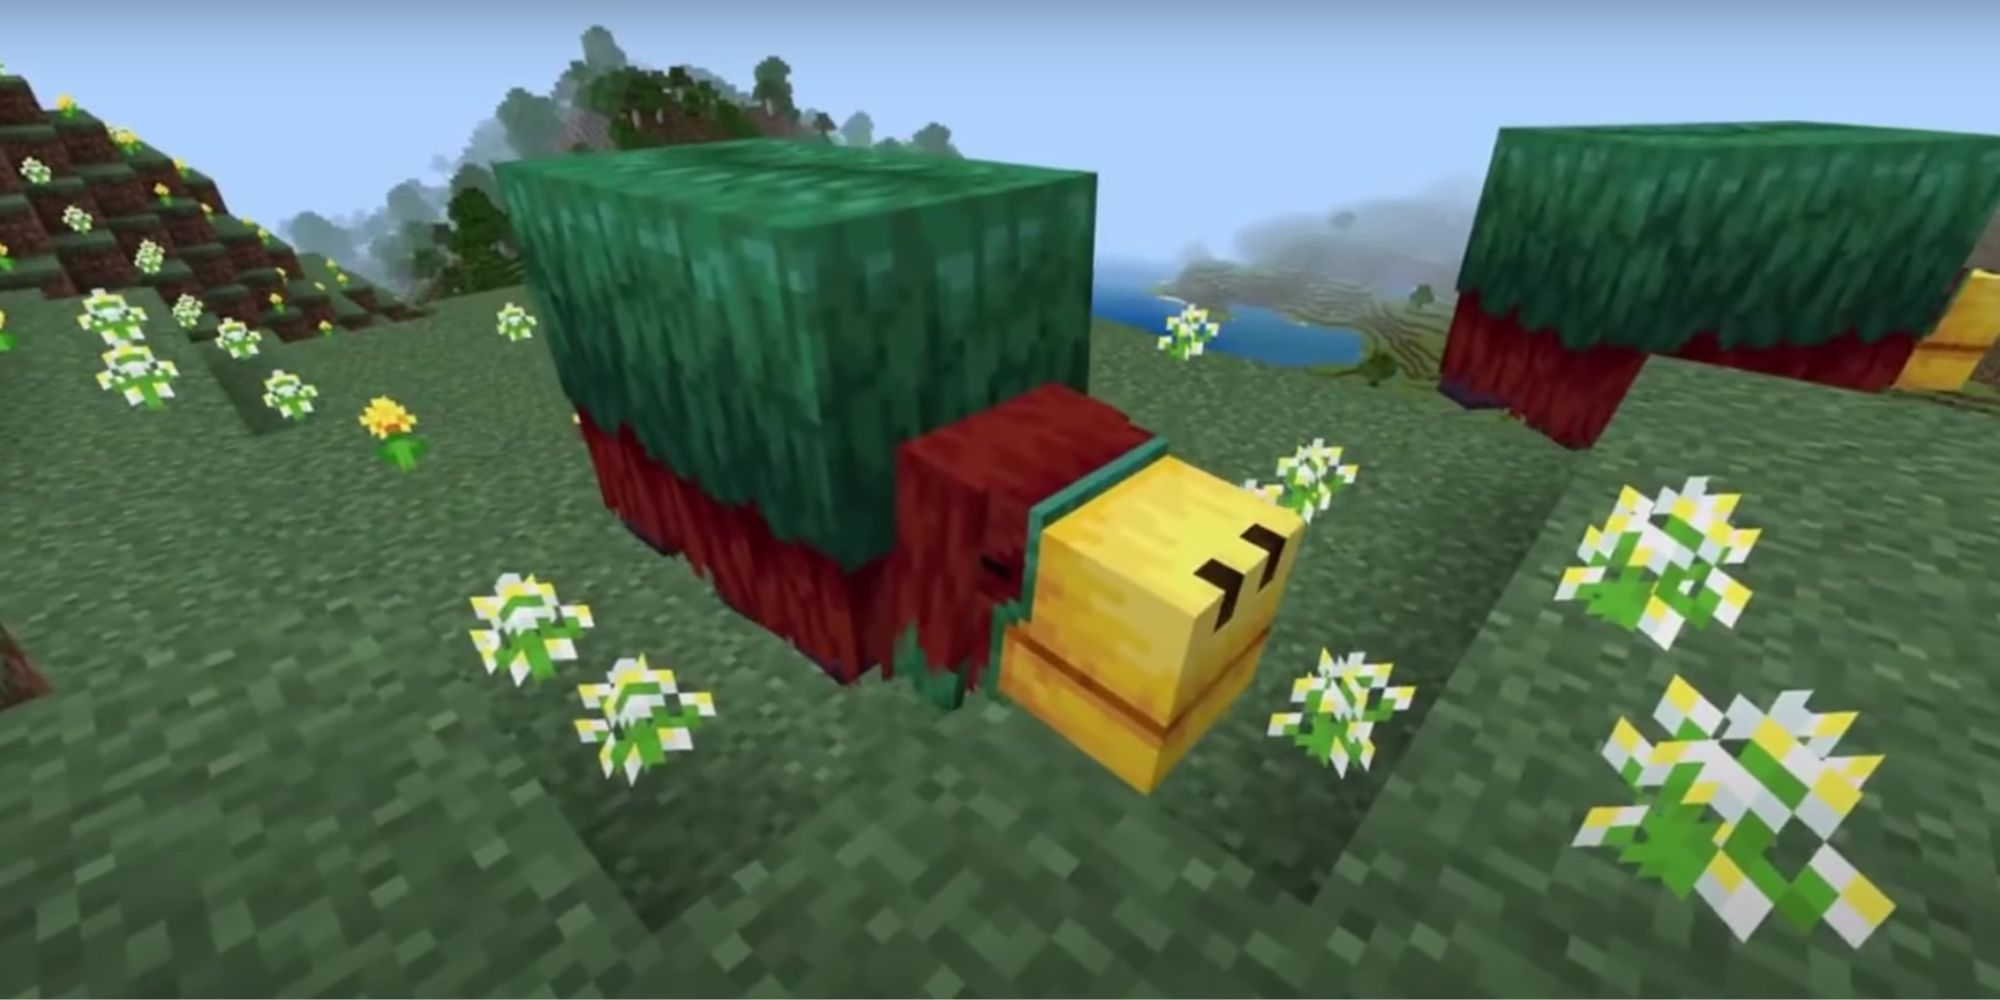 Minecraft Players Are Shocked At How Big The Sniffer Mob Is